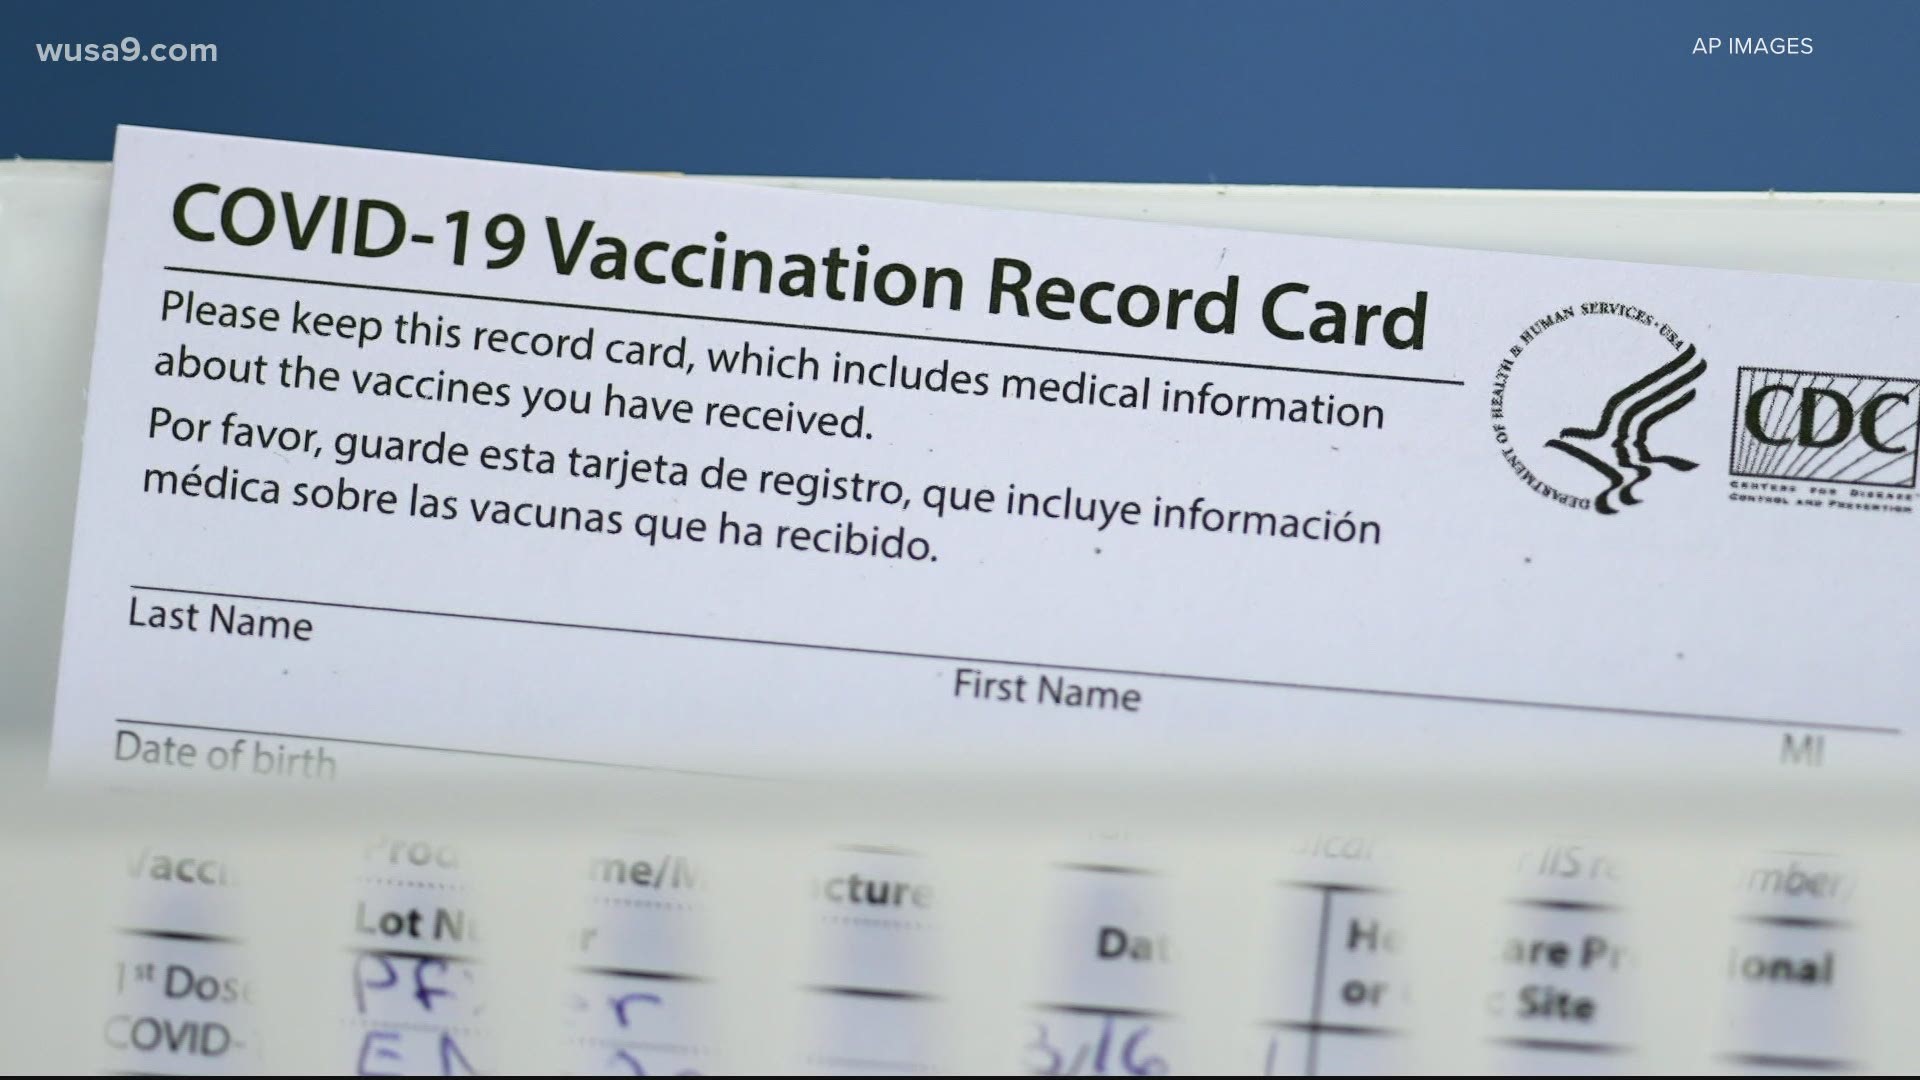 Some social media posts claim that vaccine cards are HIPAA protected documents. Experts say this claim is false.